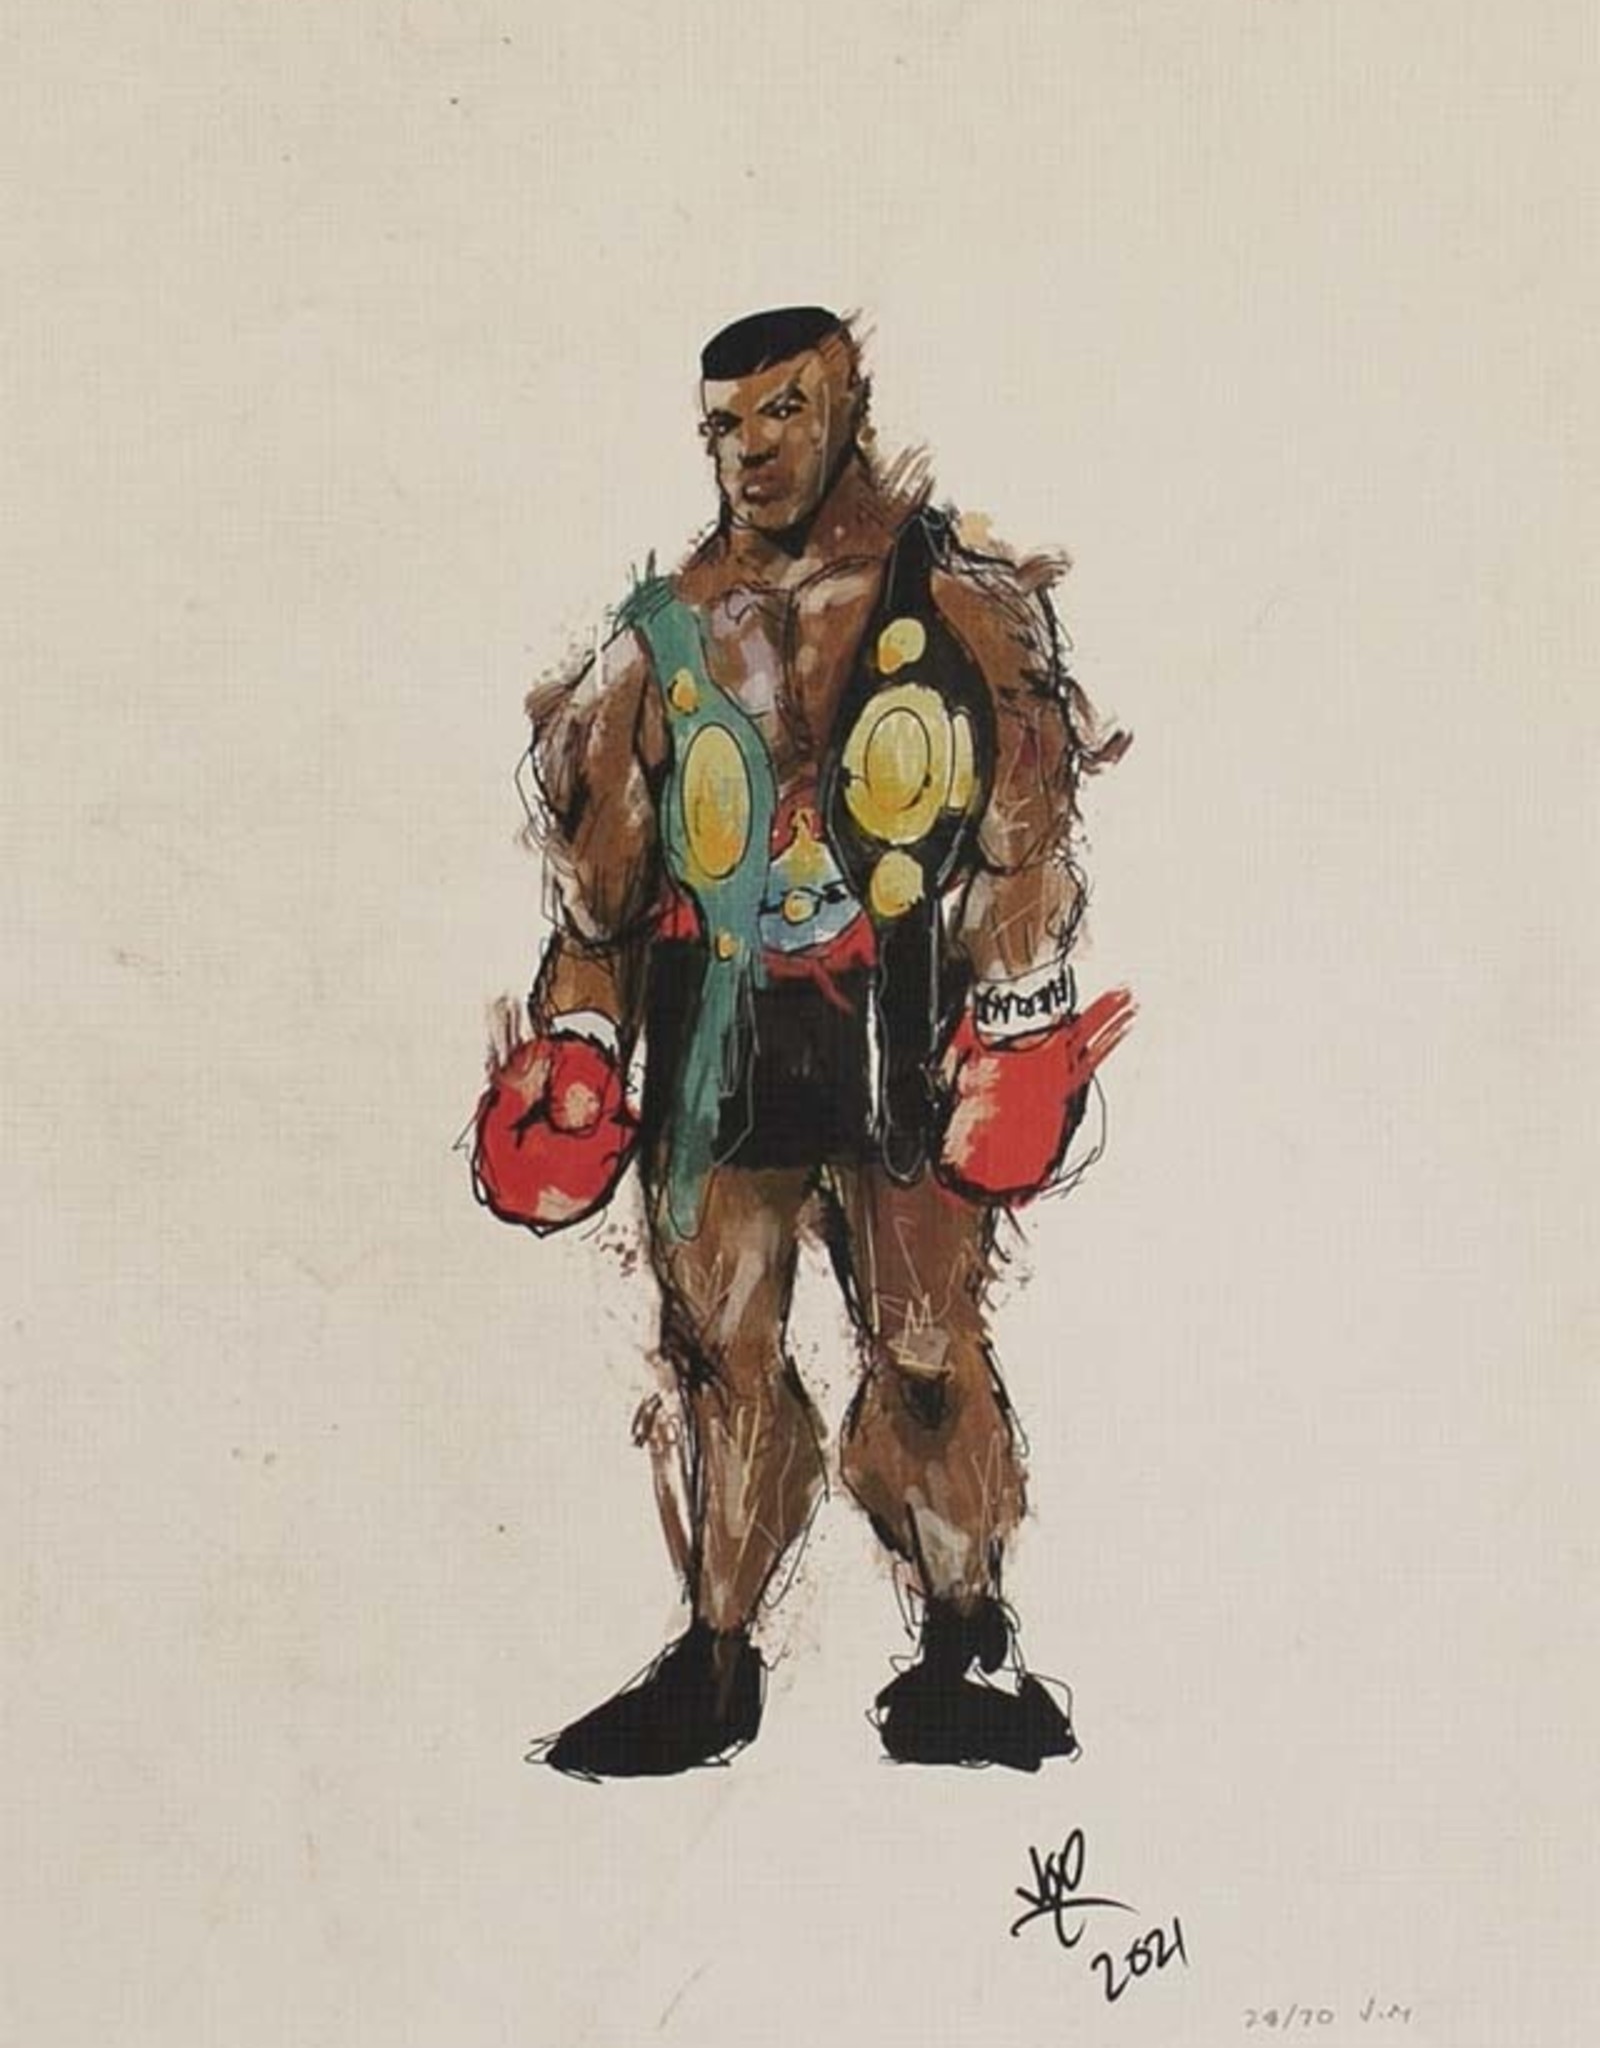 "Champ" limited edition 11x17 print by Jo Michael